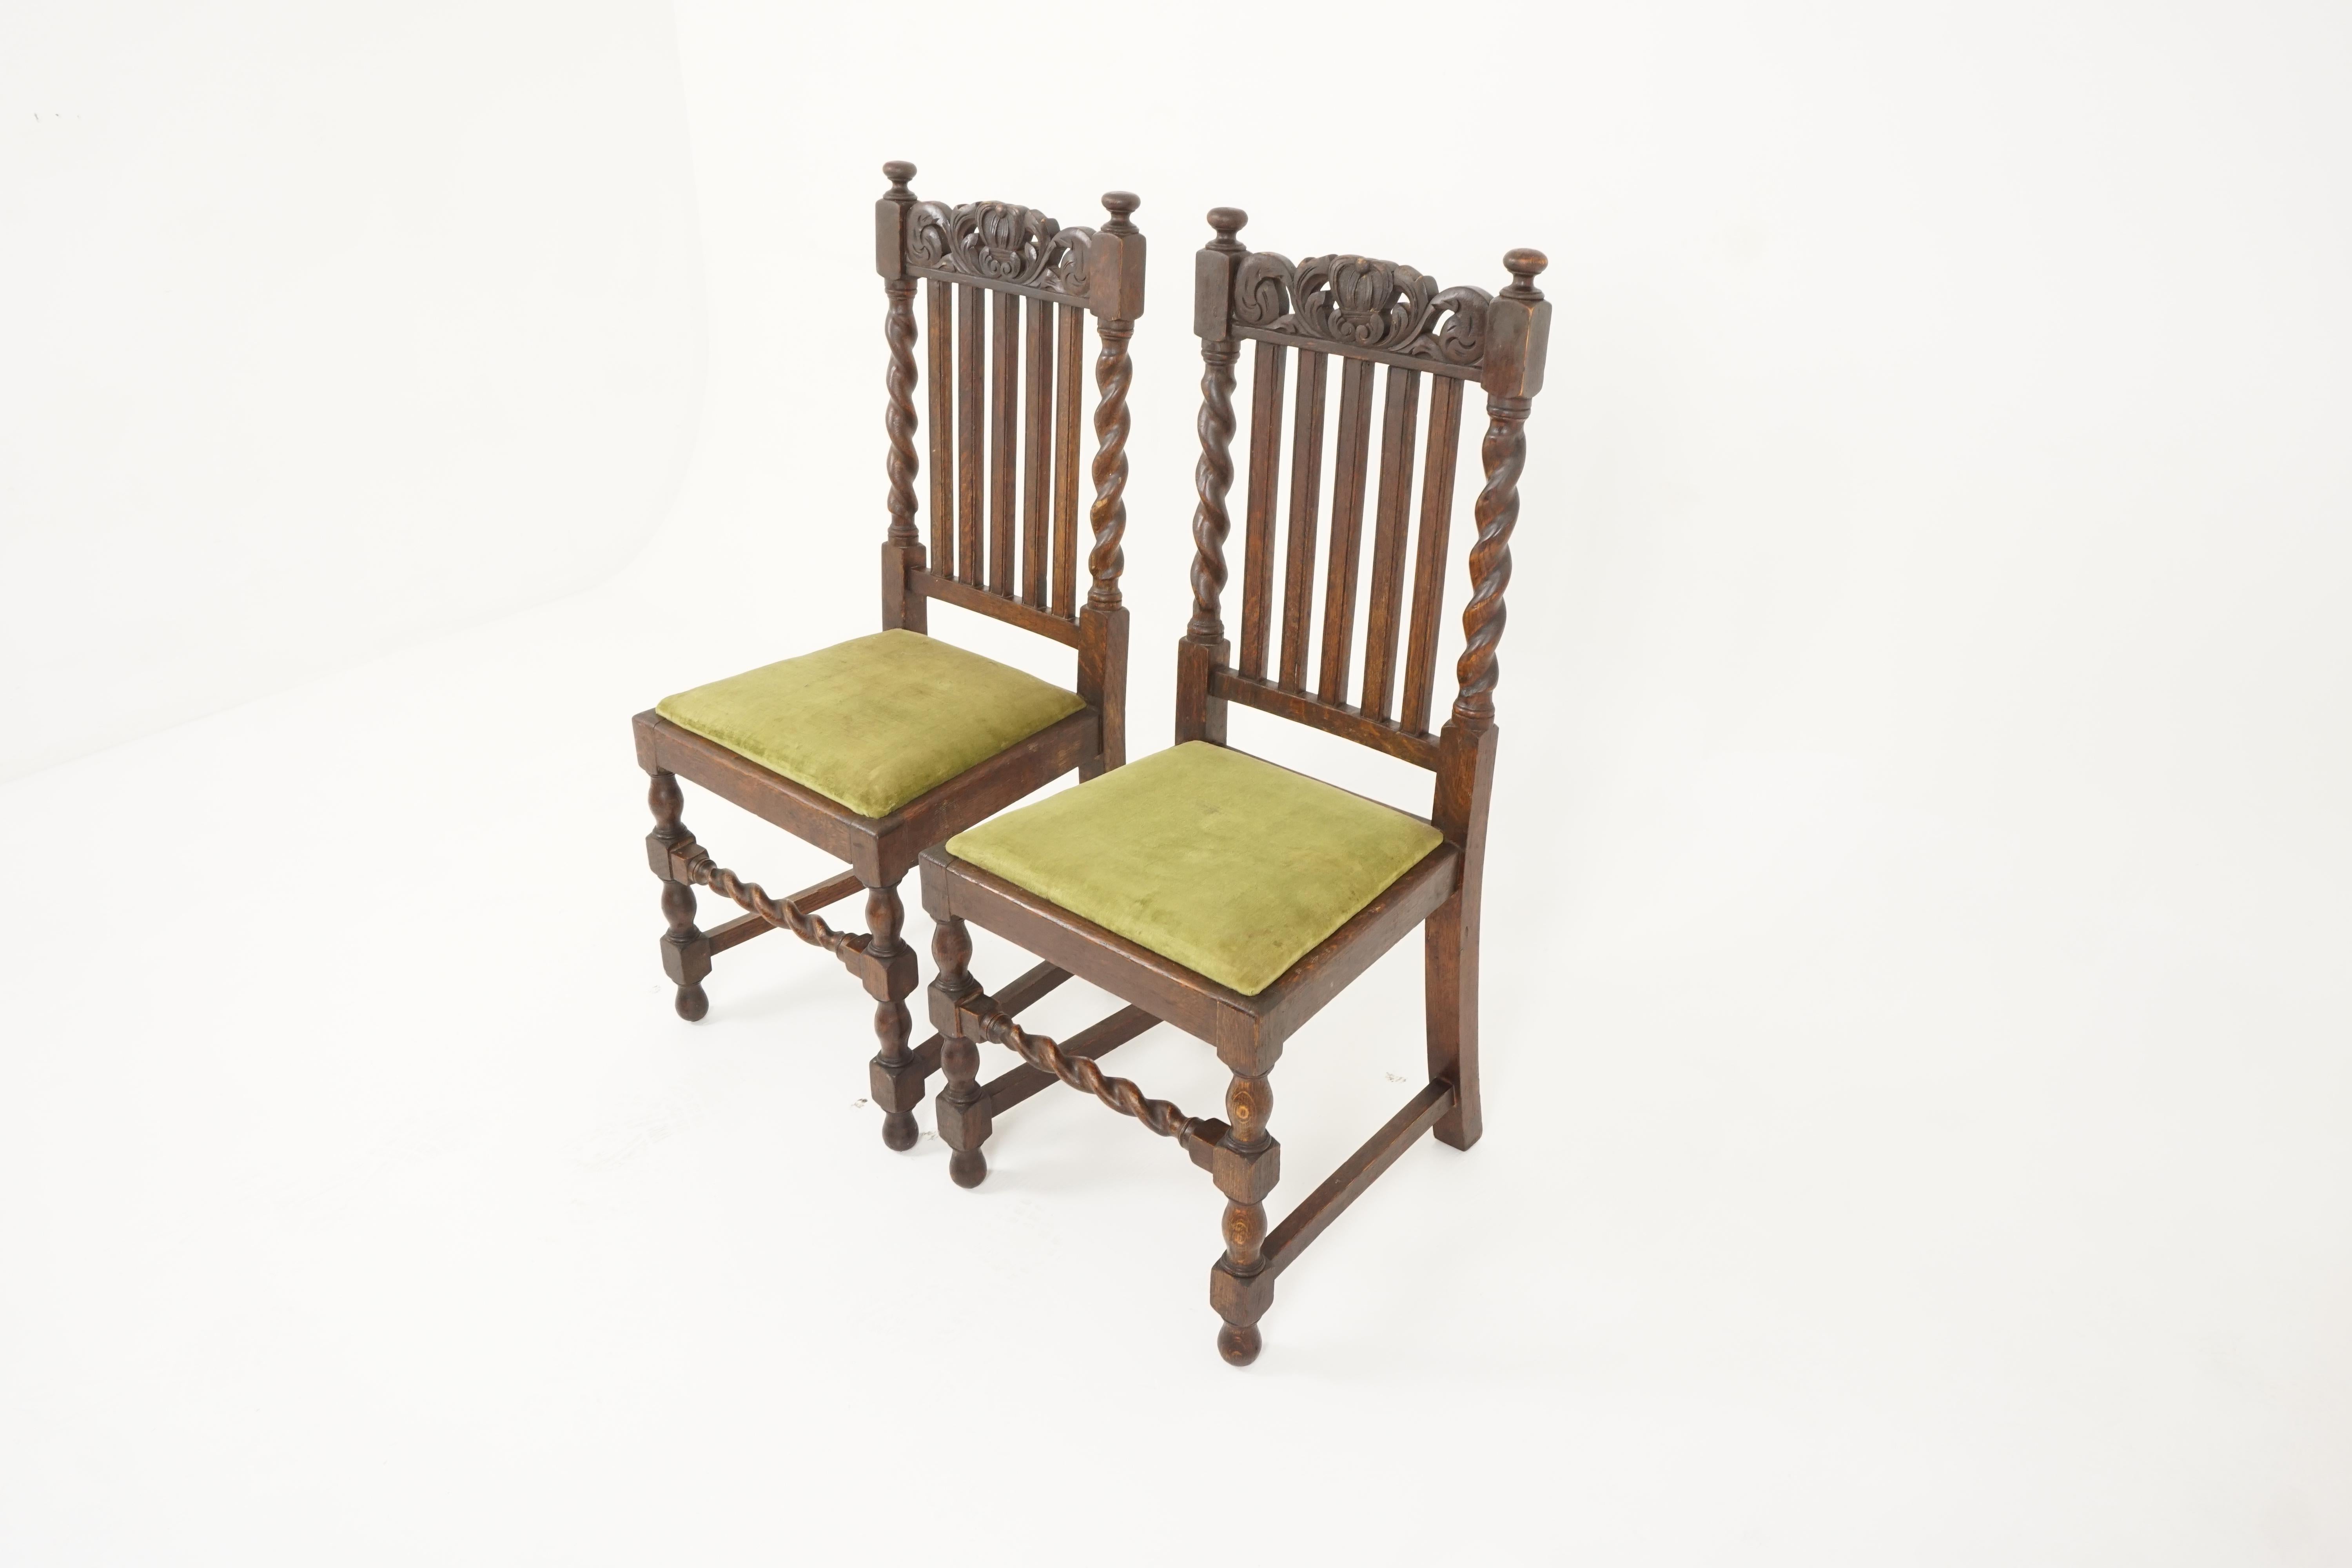 Antique pair of chairs, Edwardian dining chairs, oak barley twist, Scotland 1910, B2697

Scotland 1910
Solid oak
Original finish
Decorative carved top rail
Barley twist supports with finials on top
Slatted back design
Upholstered drop in